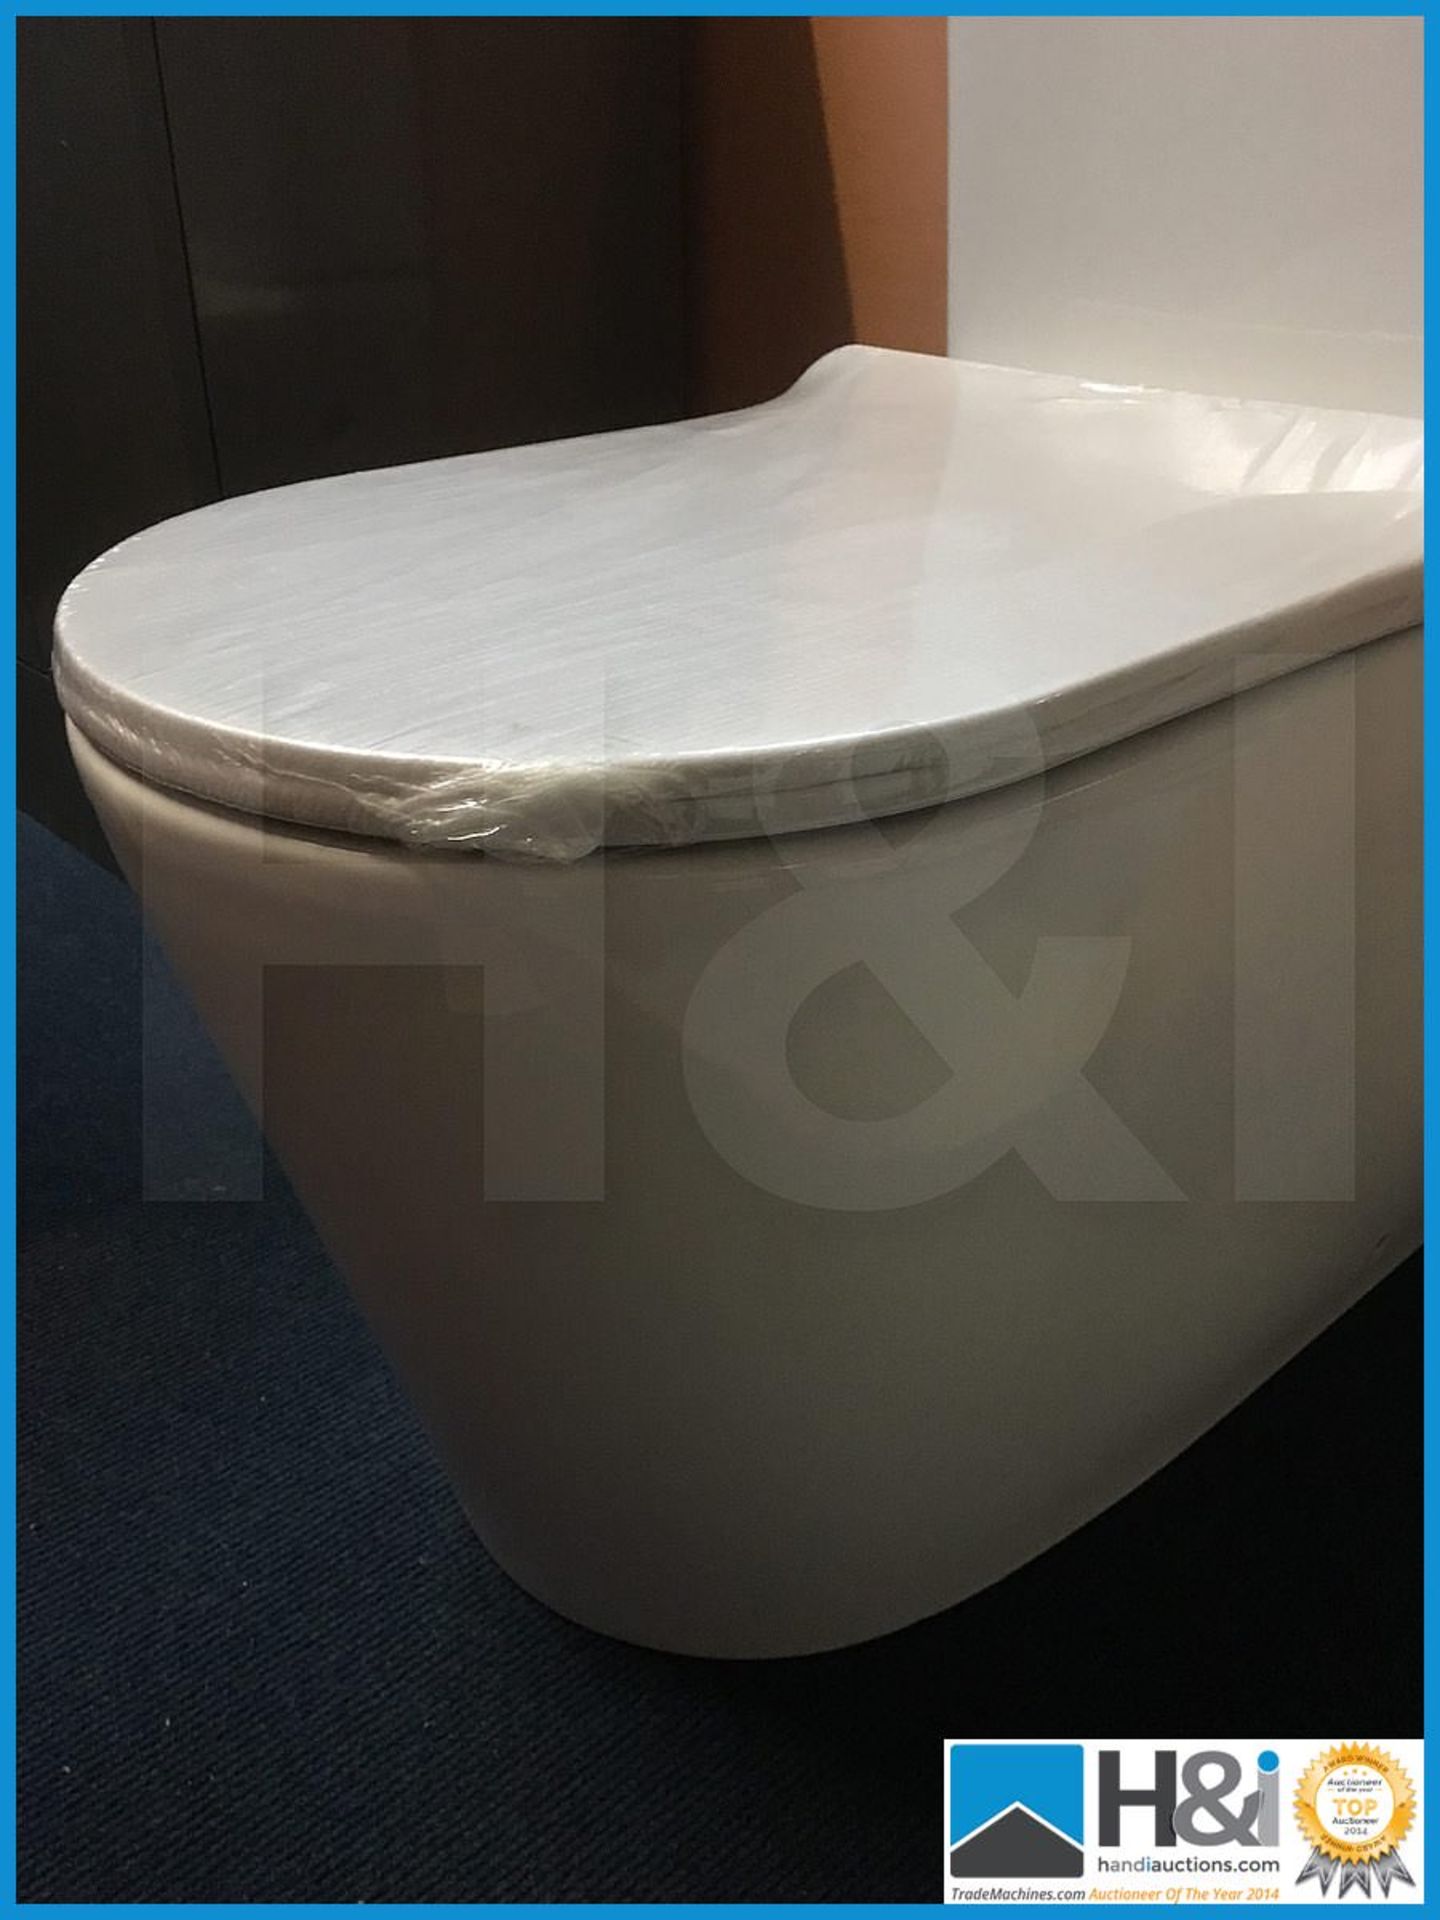 Stunning designer contemporary K008 WC with top flush and soft close seat. New and Boxed. - Image 2 of 3